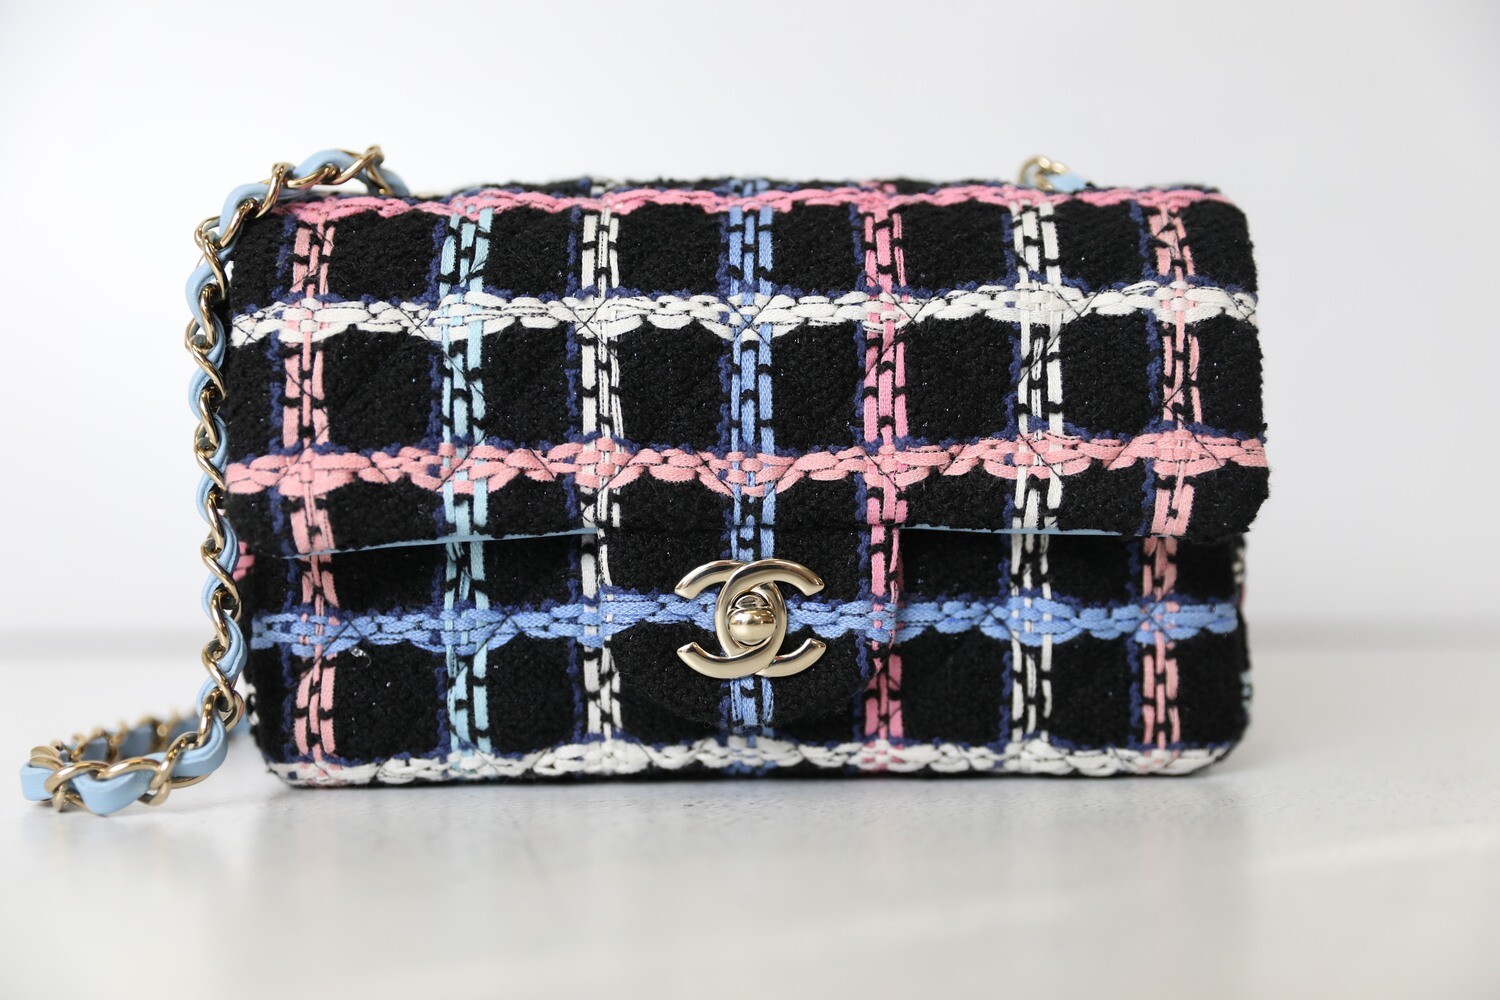 Chanel Mini Rectangular, Black with Pink/White/Blue Tweed Stitching,  Preowned in Box WA001